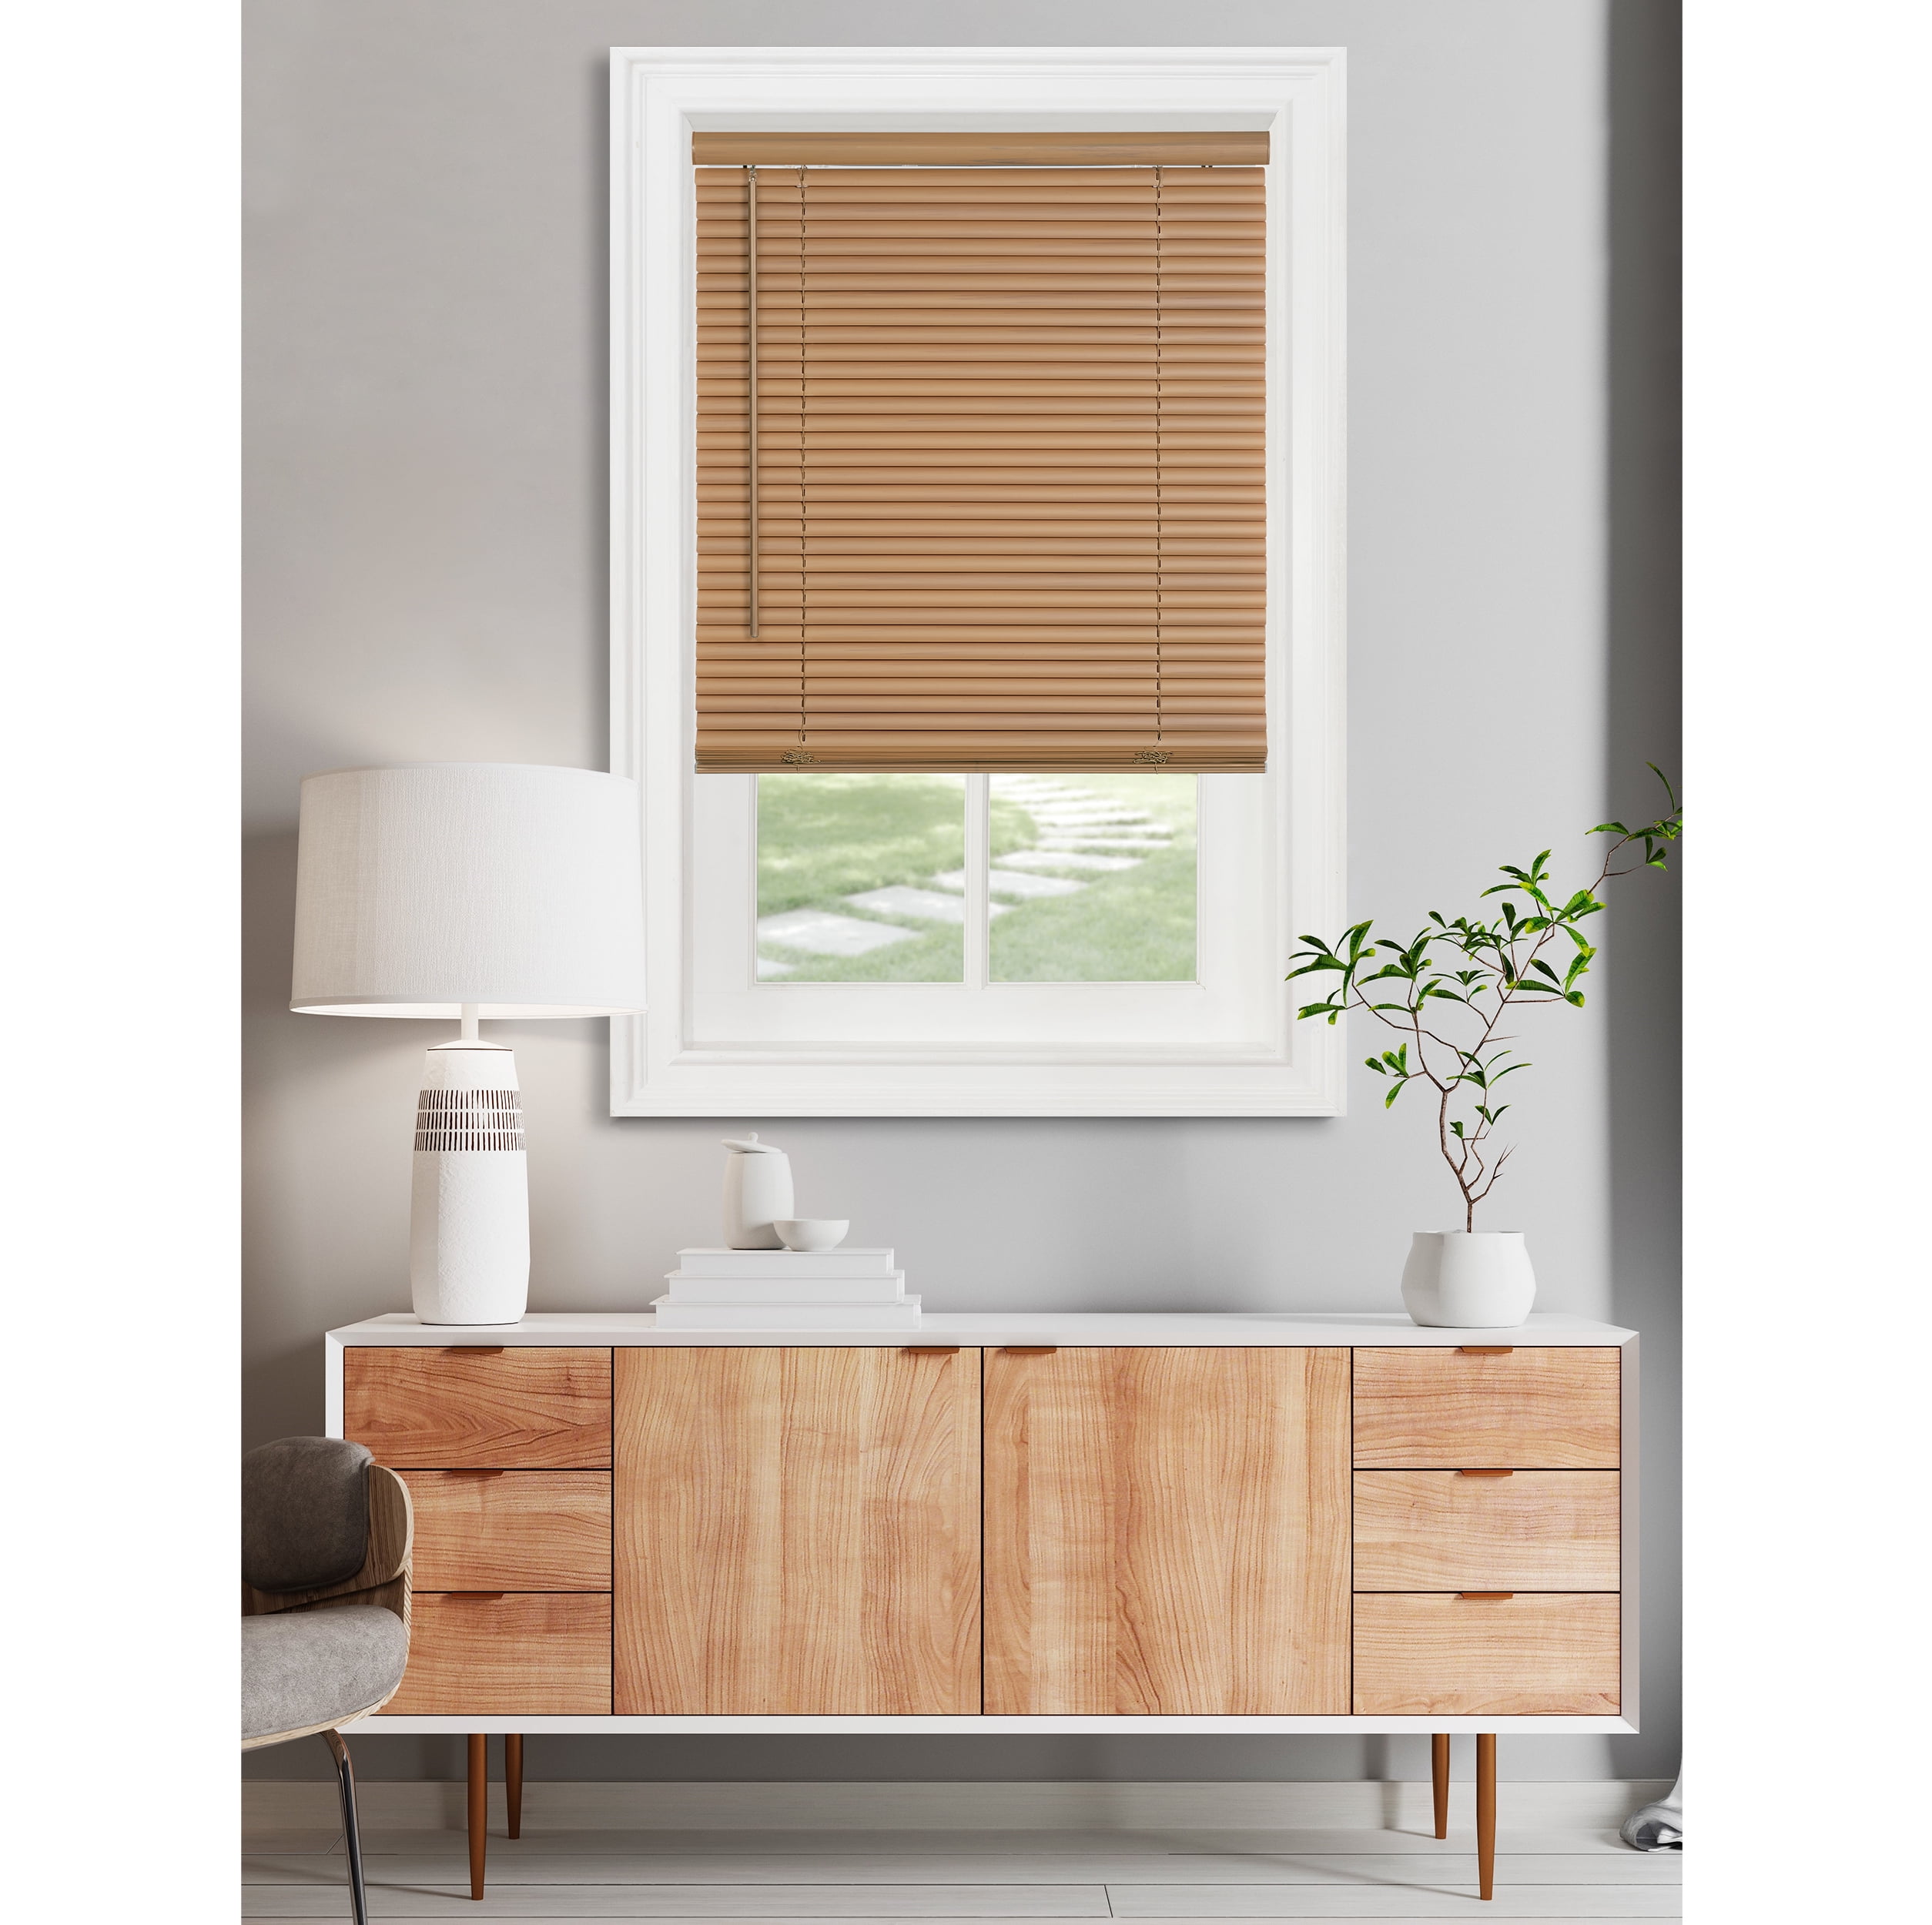 Picture of Achim MSG272WD04 72 x 64 in. Cordless GII Morningstar 1 in. Light Filtering Mini Blind - Woodtone